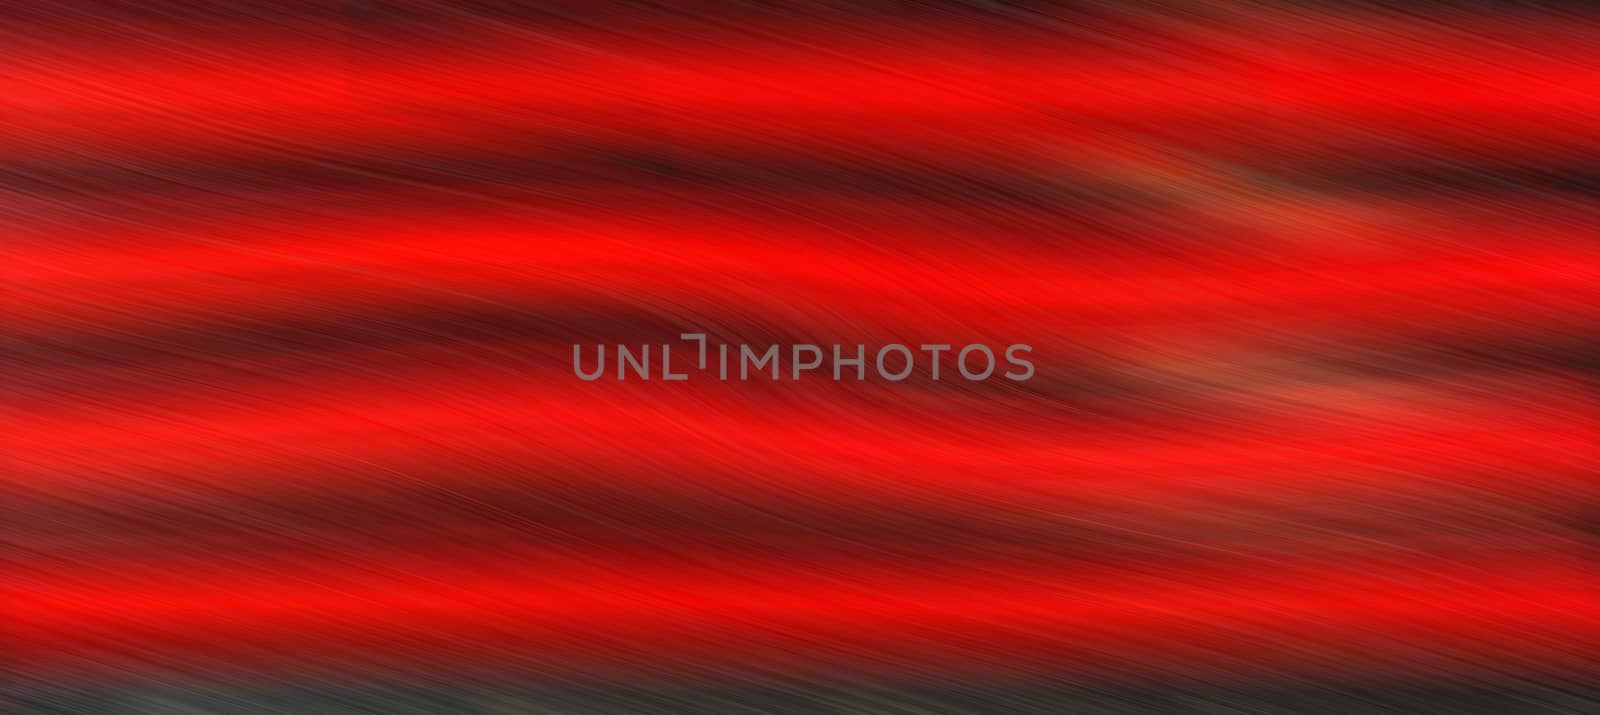 Background abstract design by TravisPhotoWorks